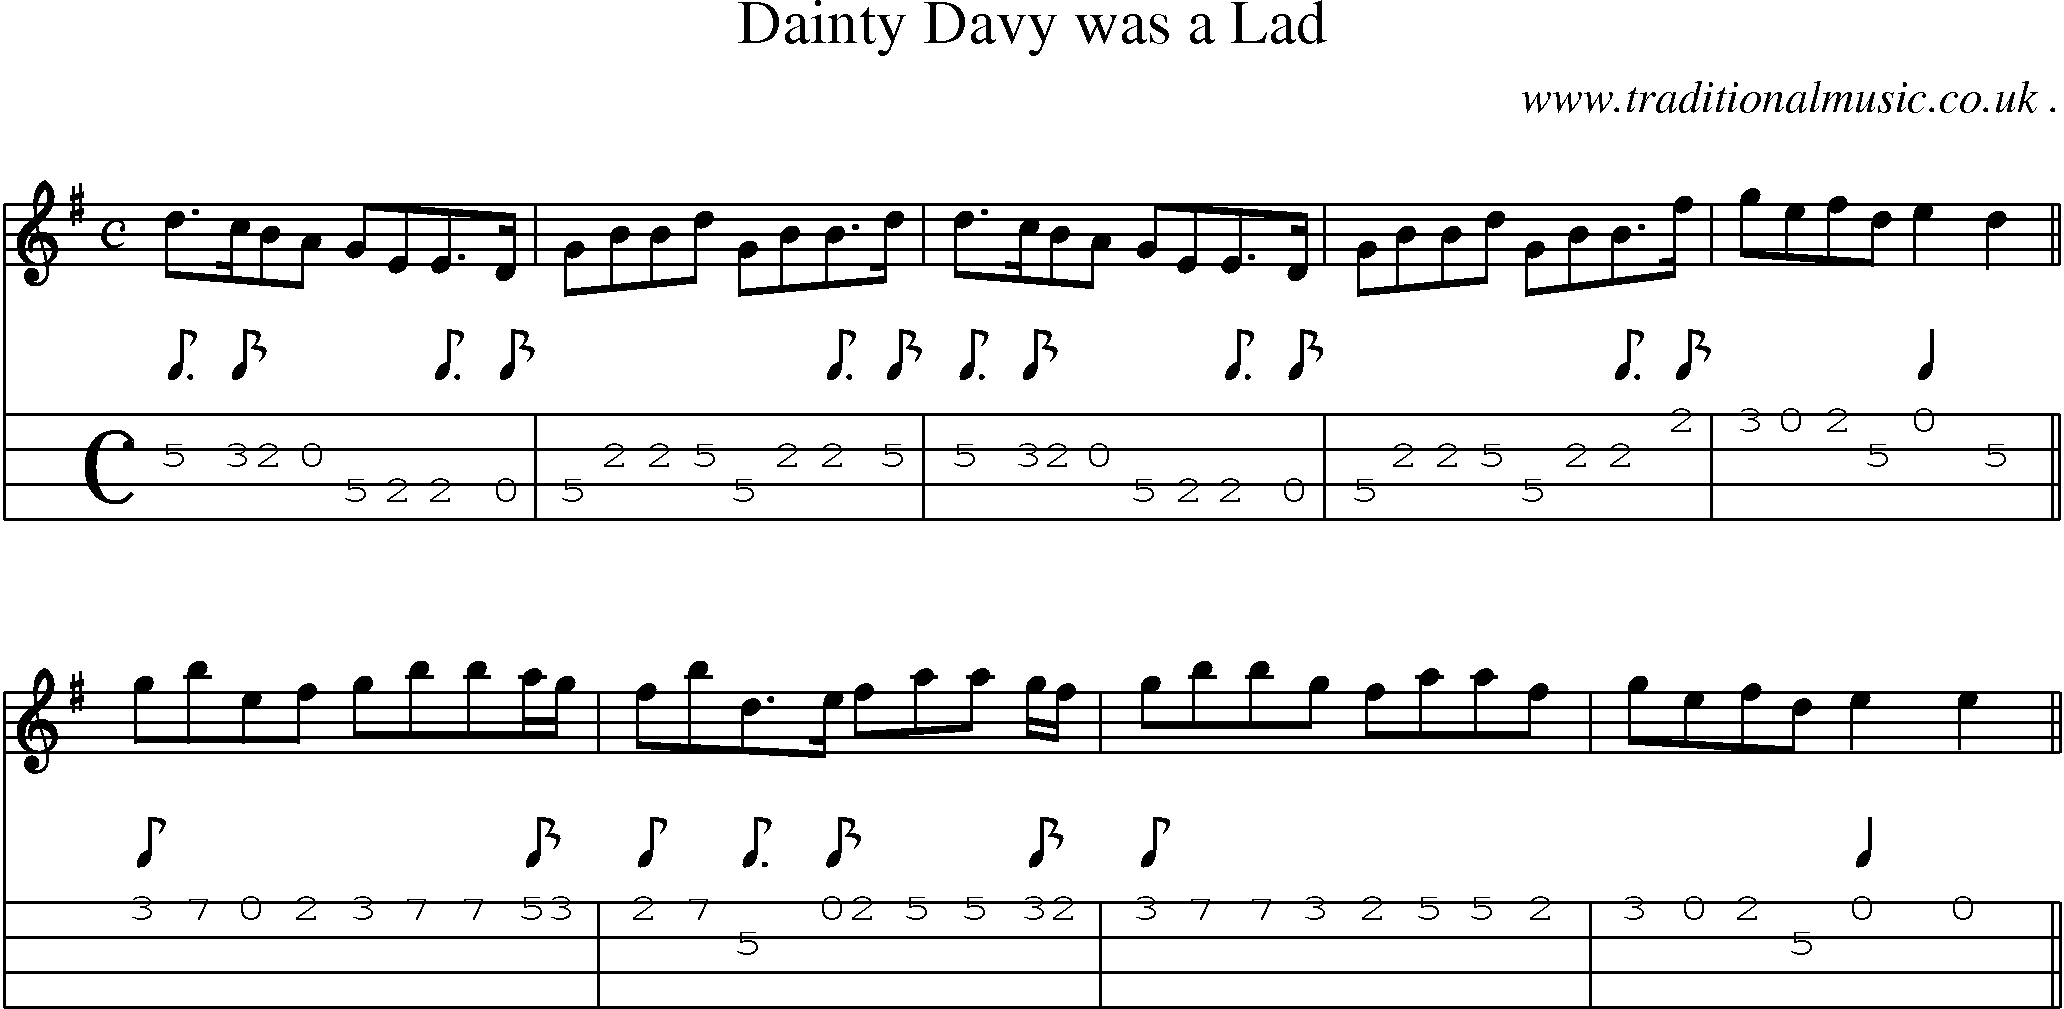 Sheet-music  score, Chords and Mandolin Tabs for Dainty Davy Was A Lad